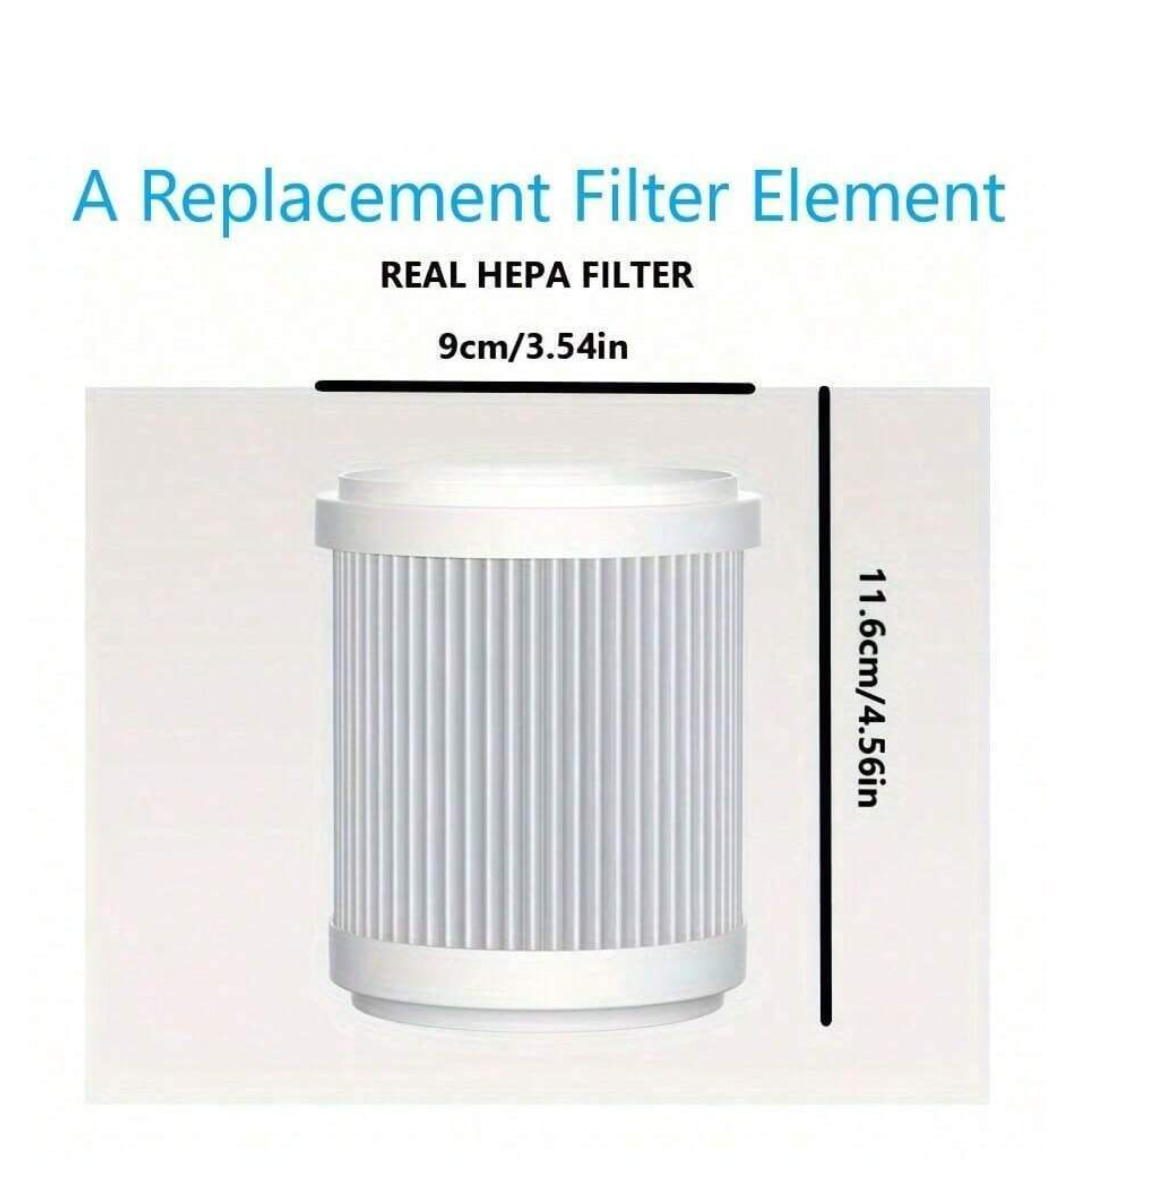 Fresh Air Oasis: HEPA Purifier with Fragrance Sponge & Activated Carbon Filter - Banish Odors & Pollutants Everywhere!